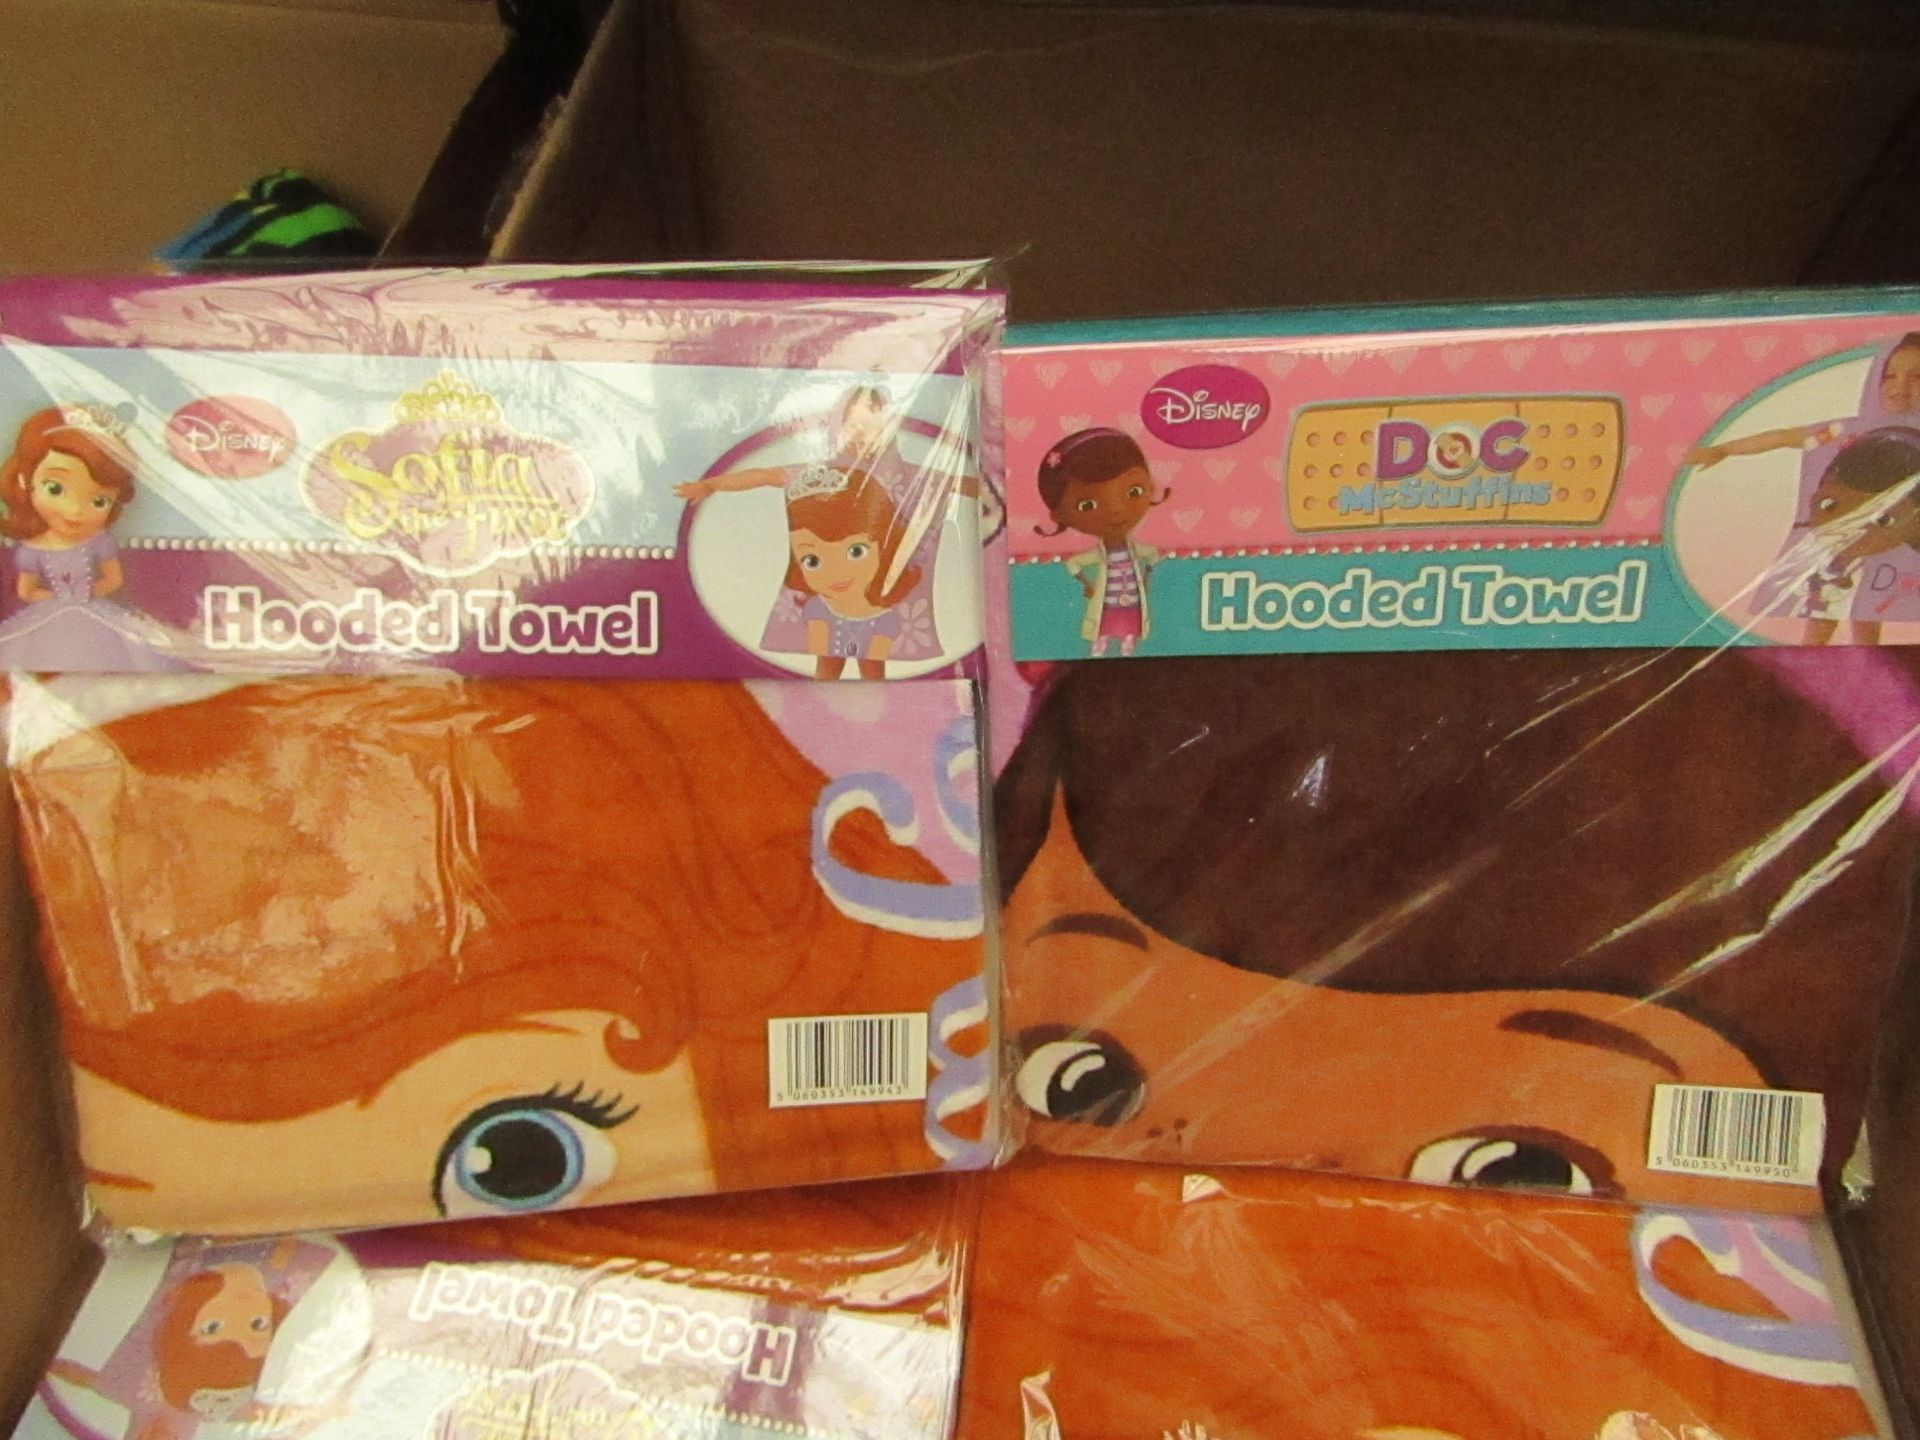 2 x Hooded Towels. 1 Being Sofia The First & The Other Doc McStiffins. Both New & Packaged